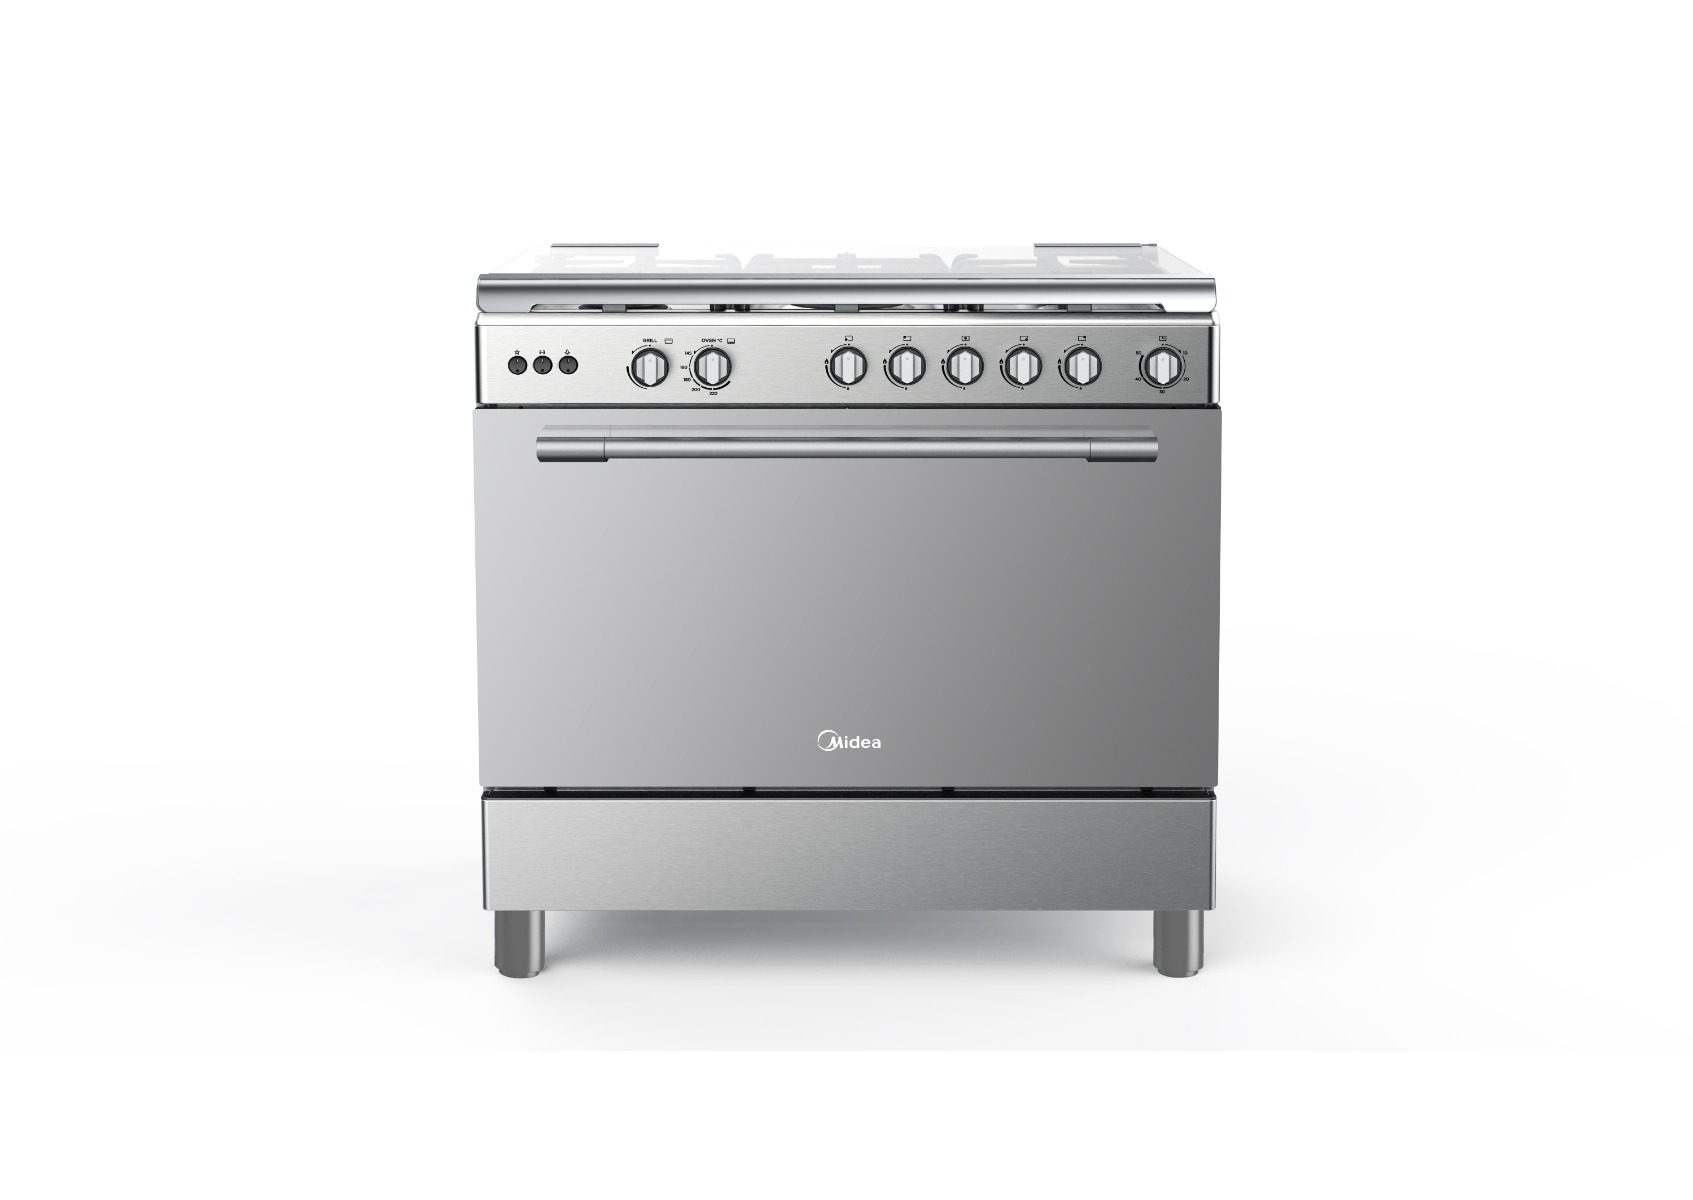 Midea gas oven size 60 x 90 cm, 5 burners, heavy grille, steel - 36LMG5G022